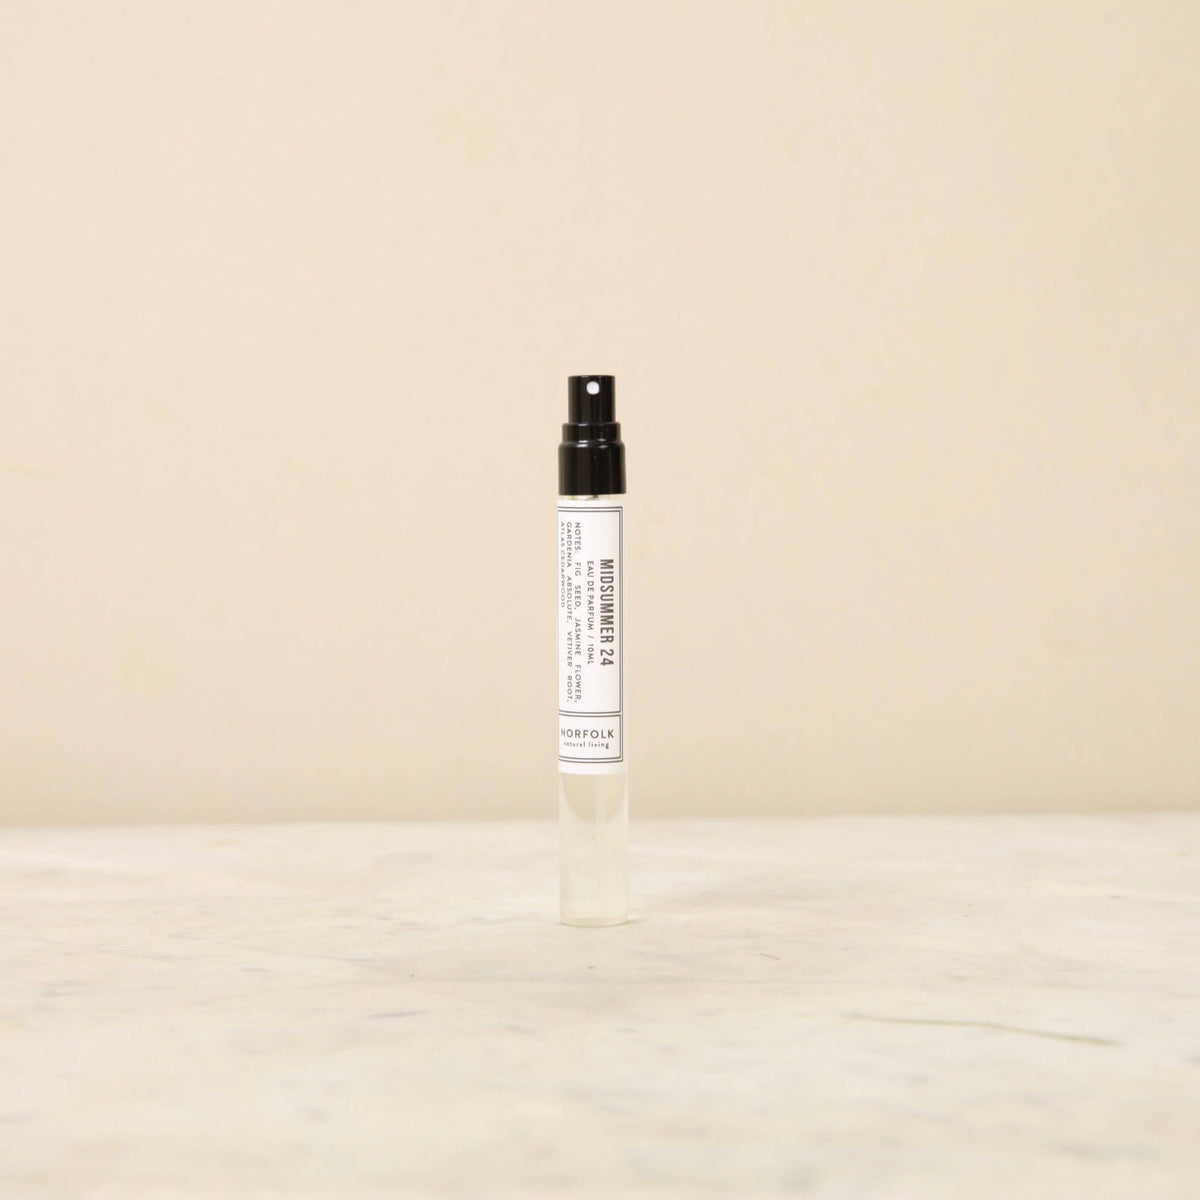 A small, transparent spray bottle with a black cap standing upright on a light beige surface, featuring a white label with minimalistic text and described as containing Norfolk Natural Living Parfum MidWinter 21 - 10ml.